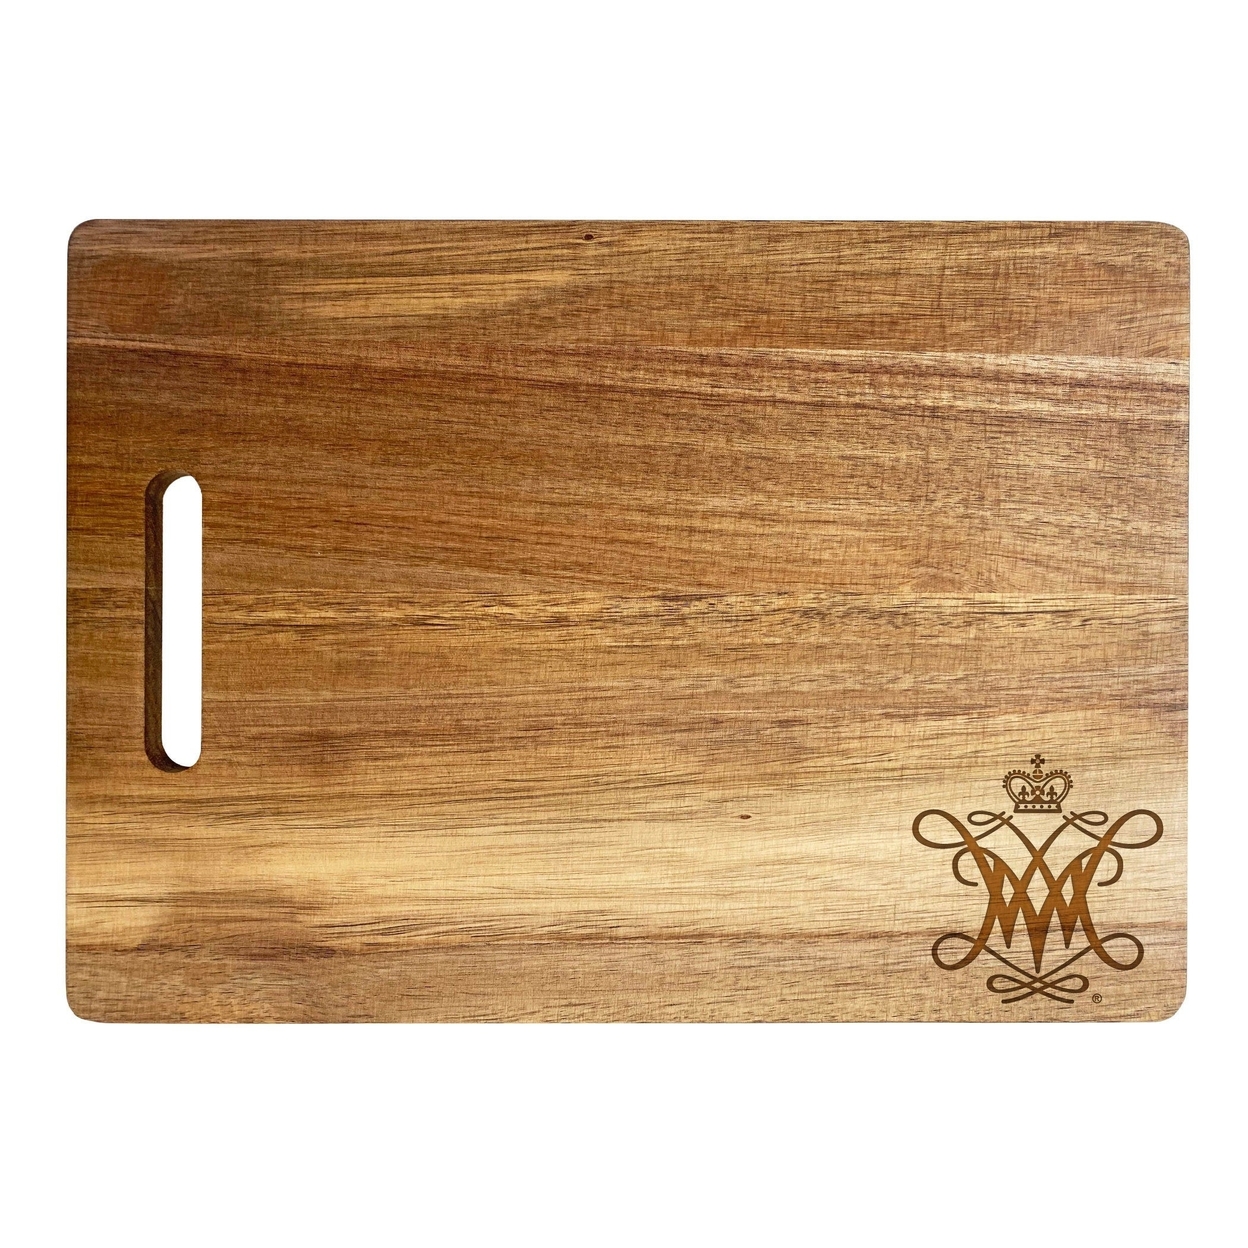 William And Mary Engraved Wooden Cutting Board 10 X 14 Acacia Wood - Small Engraving